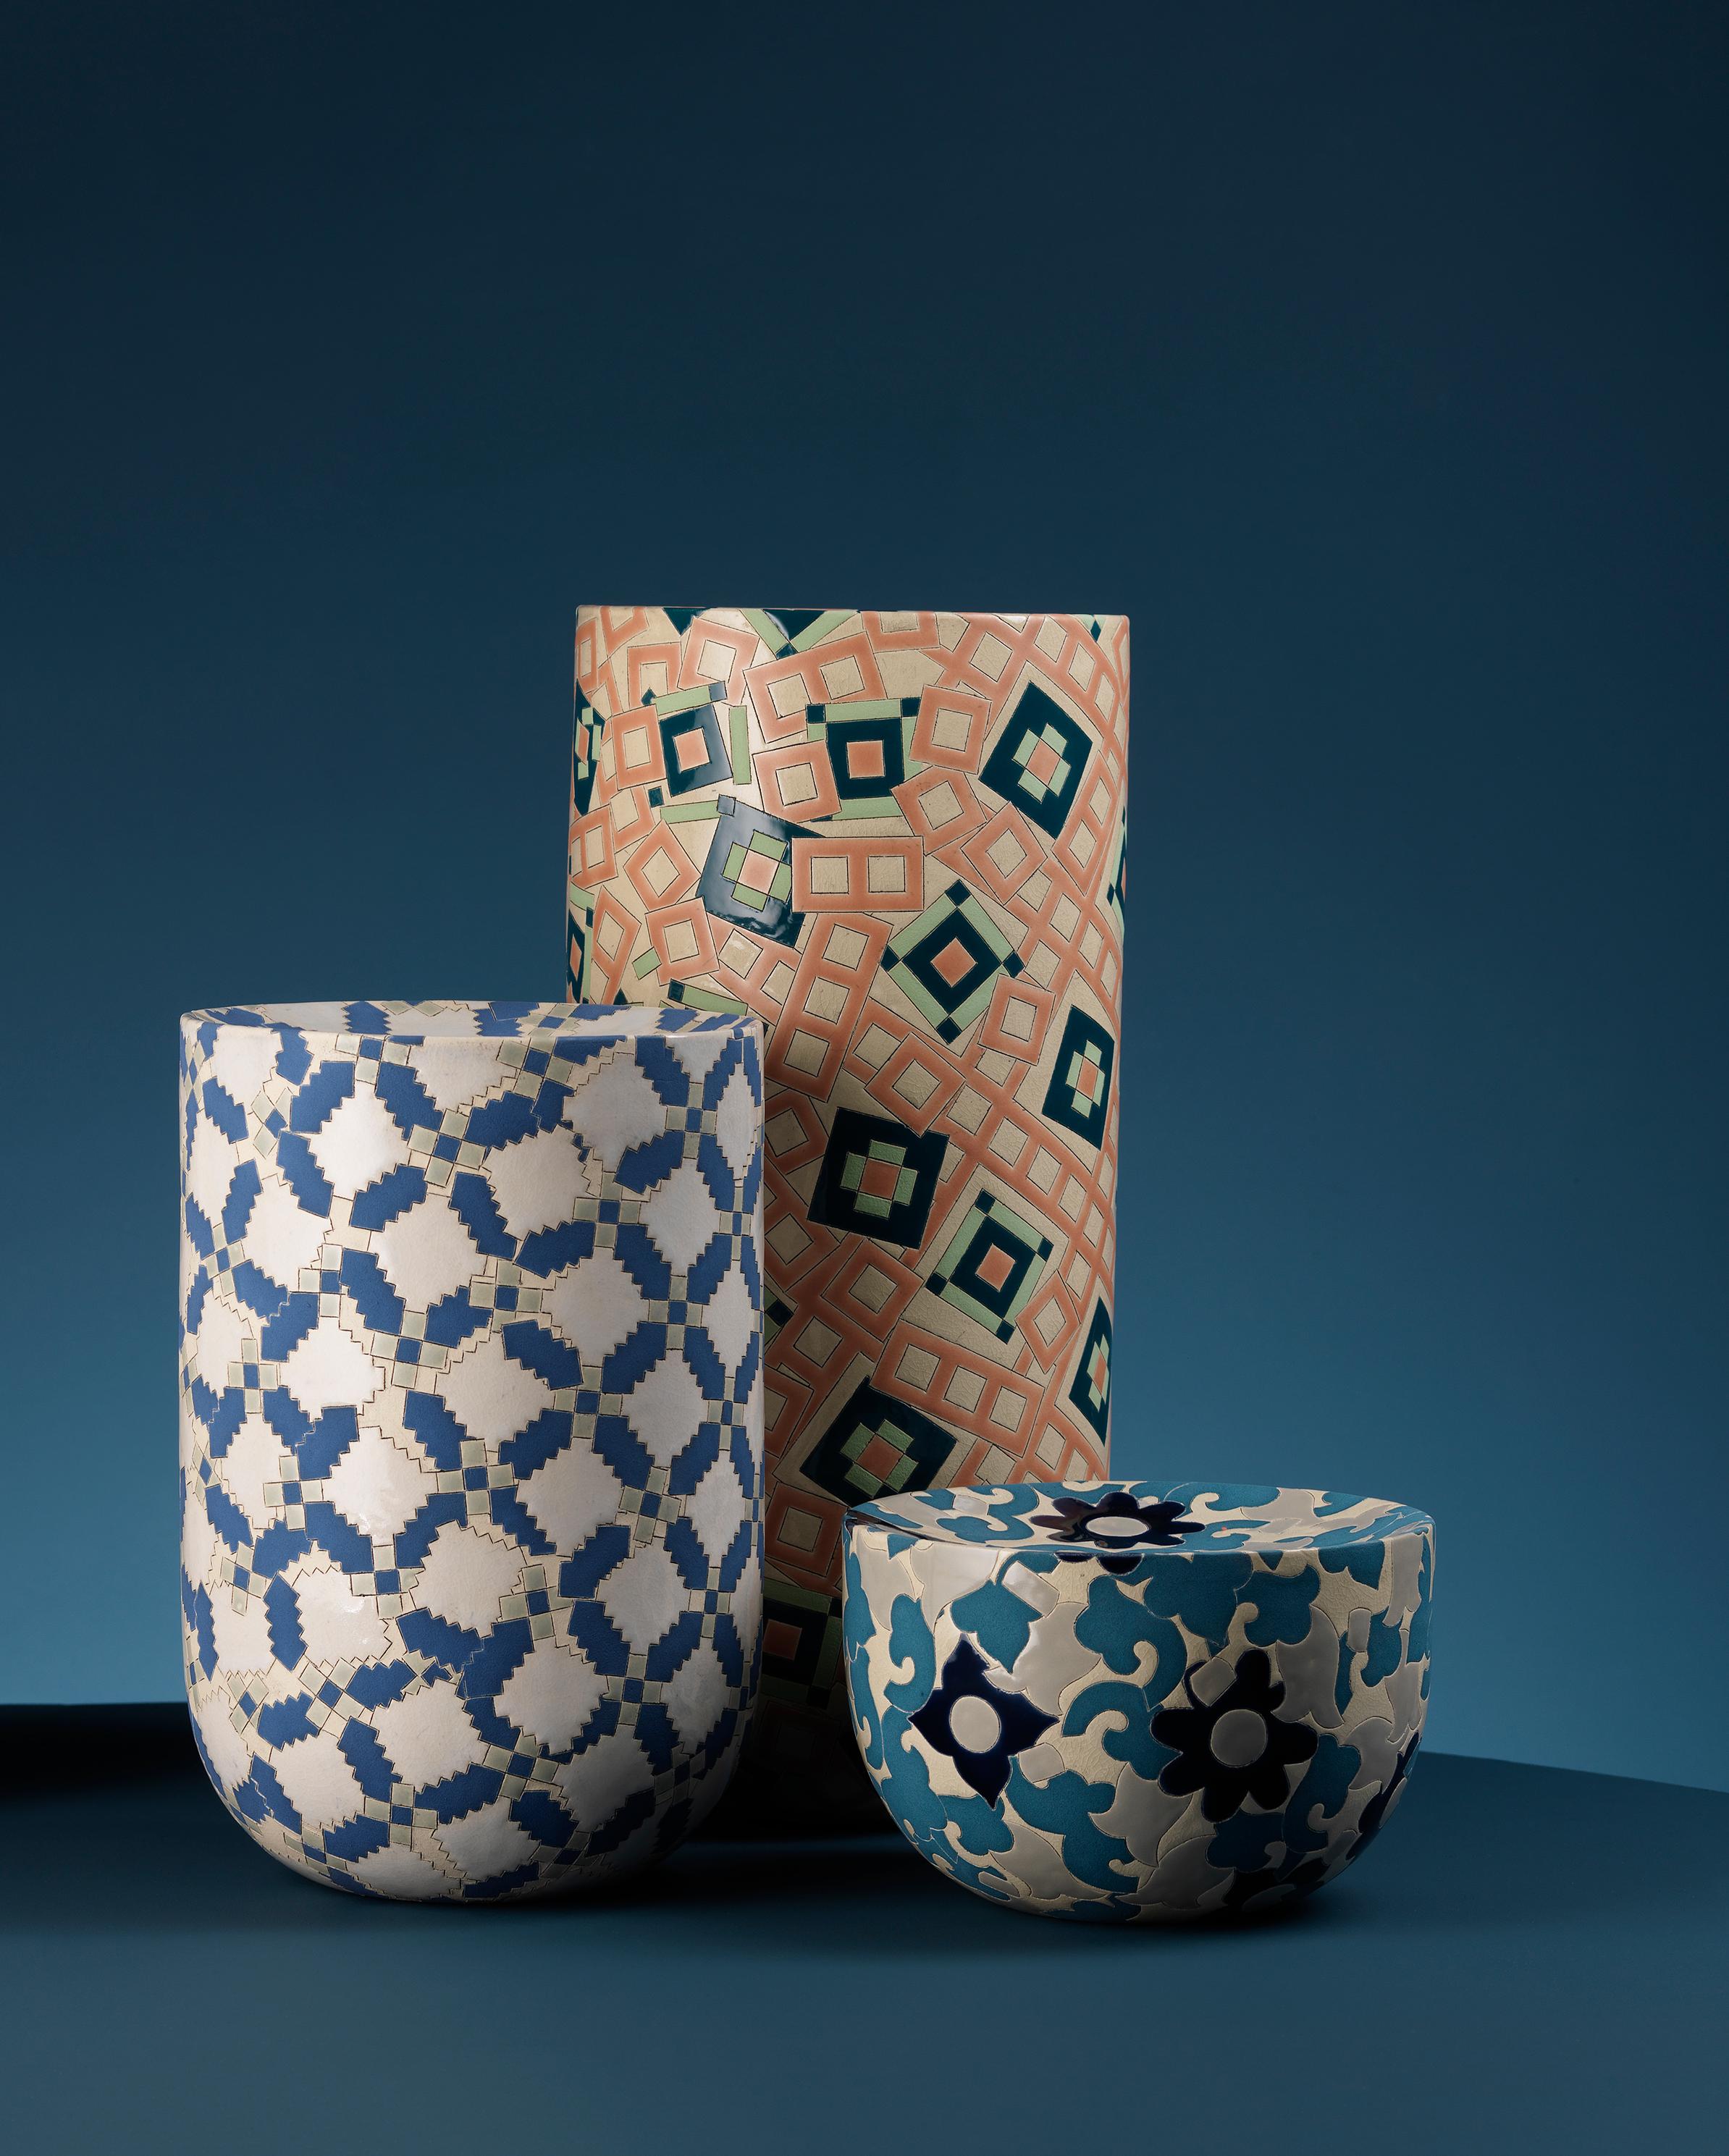 Based in Edinburgh, ceramic artist Frances Priest explores the cultural histories of ornament through the creation of intricately made ceramic objects and is represented in collections of international significance.

This Vase Form is from Frances'